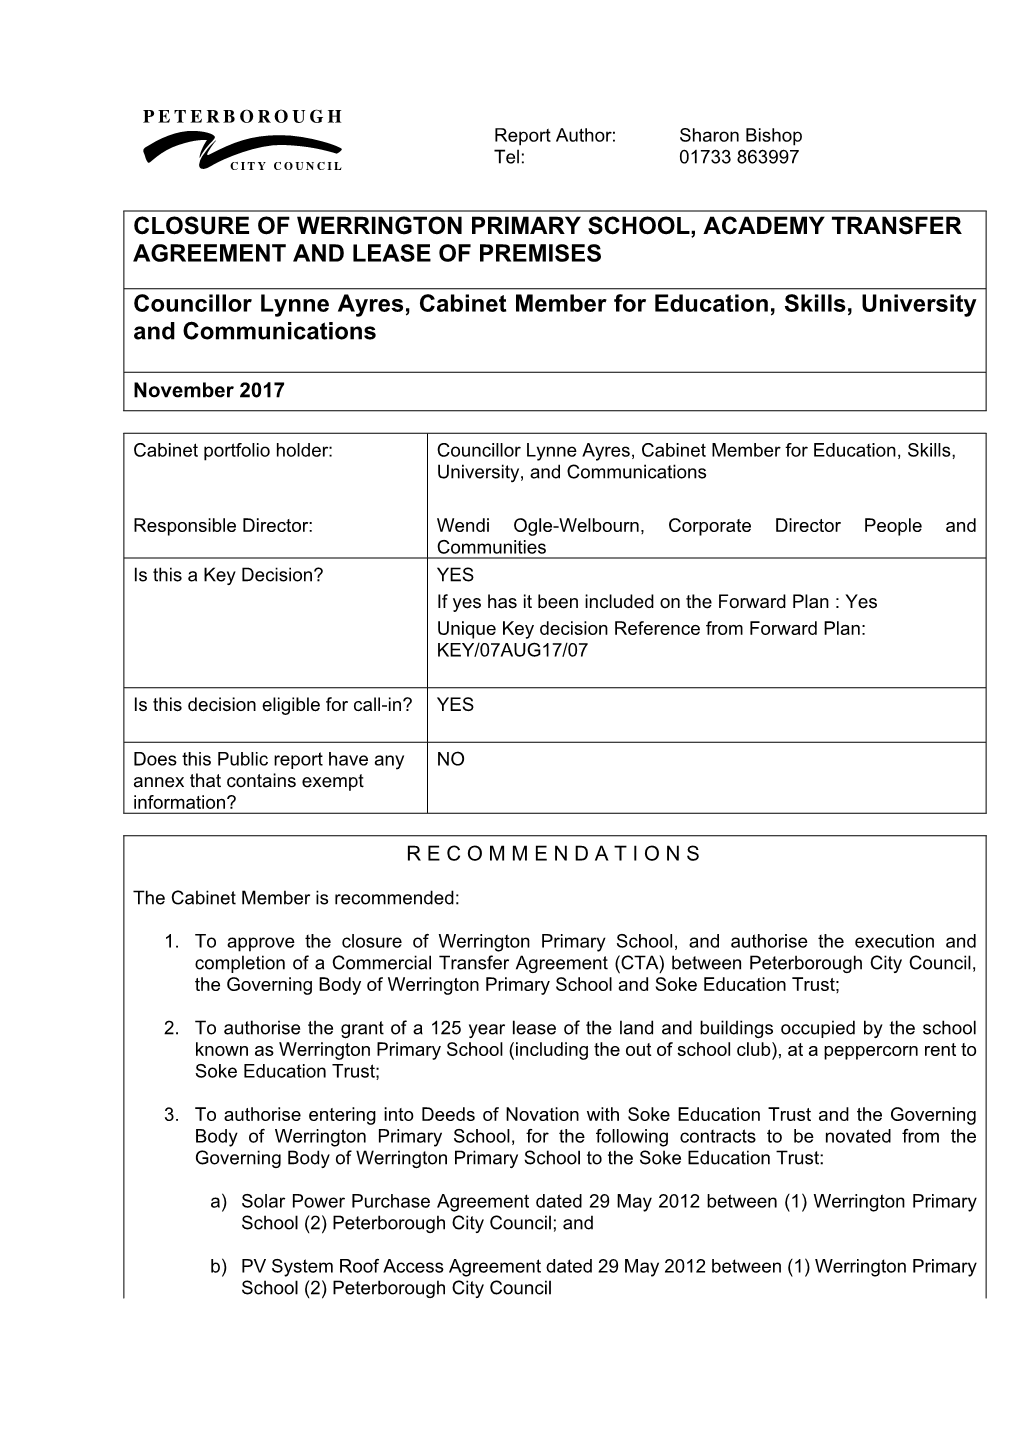 Closure of Werrington Primary School, Academy Transfer Agreement and Lease of Premises